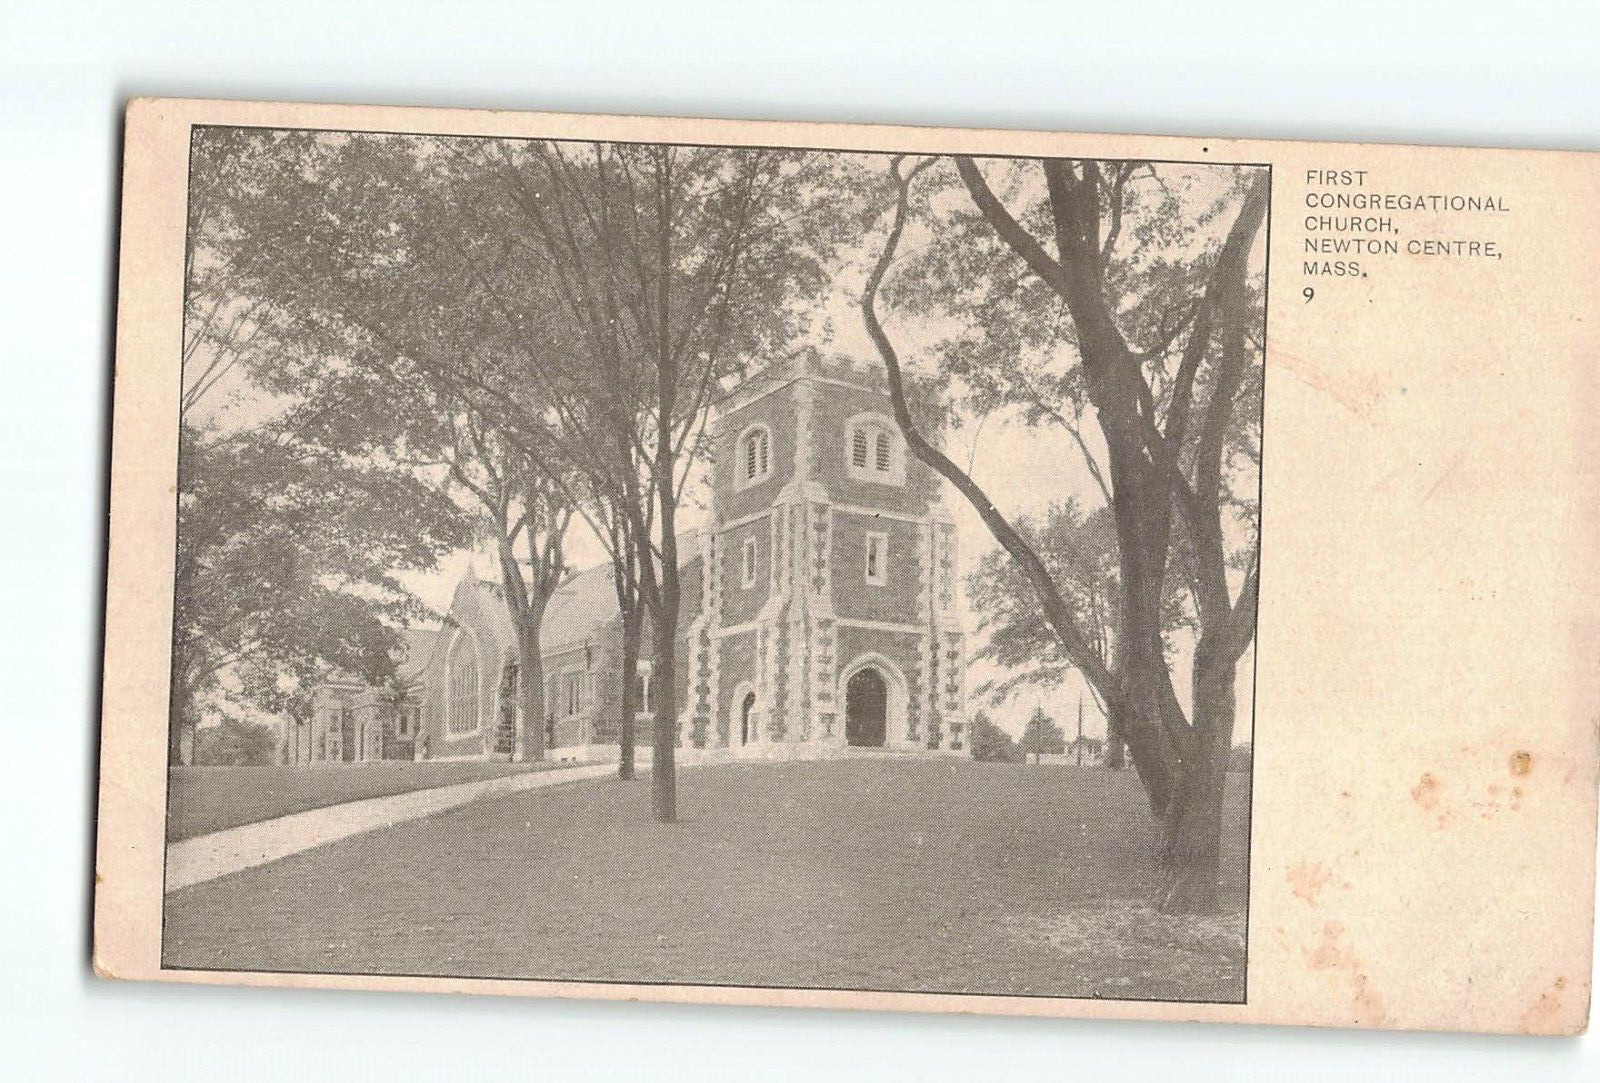 Old Postcard of FIRST CONGREGATIONAL CHURCH NEWTON CENTRE MA